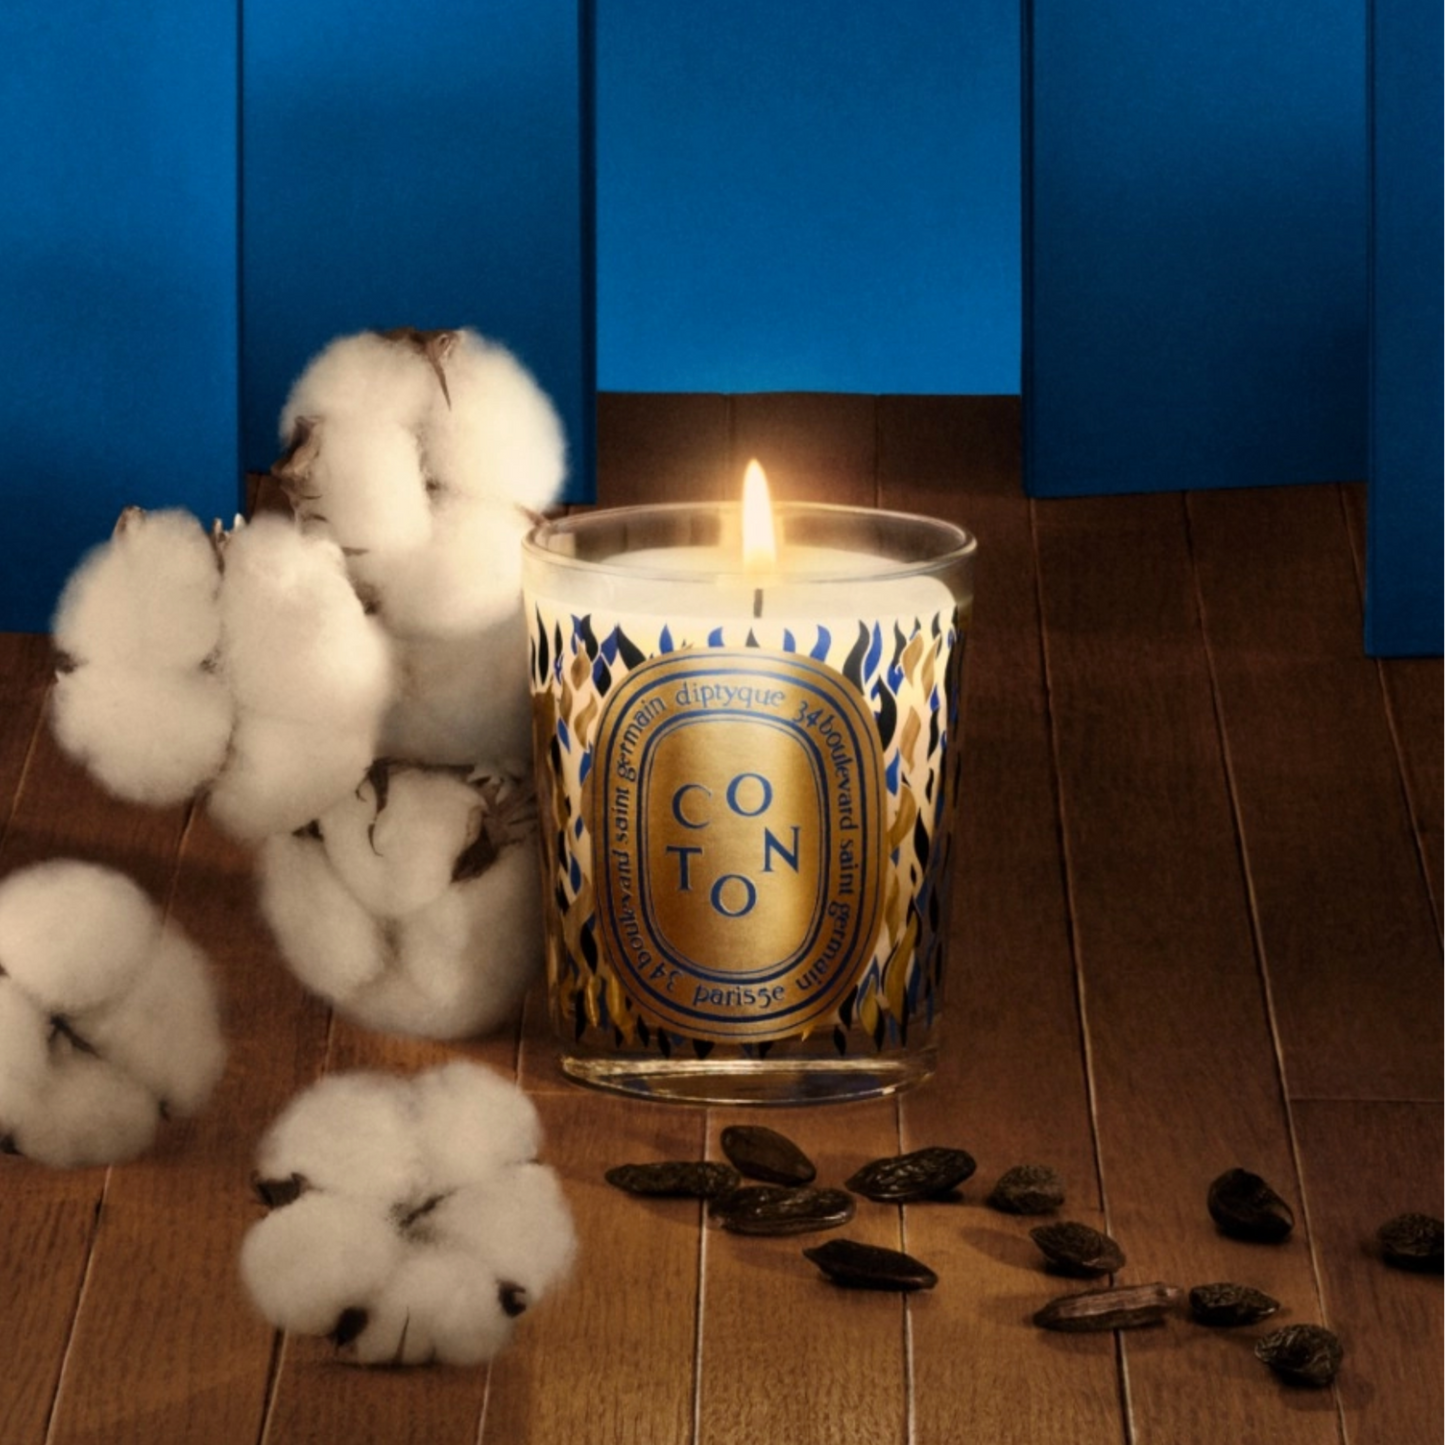 Diptyque - Classic Candle - Cotton - Limited Edition